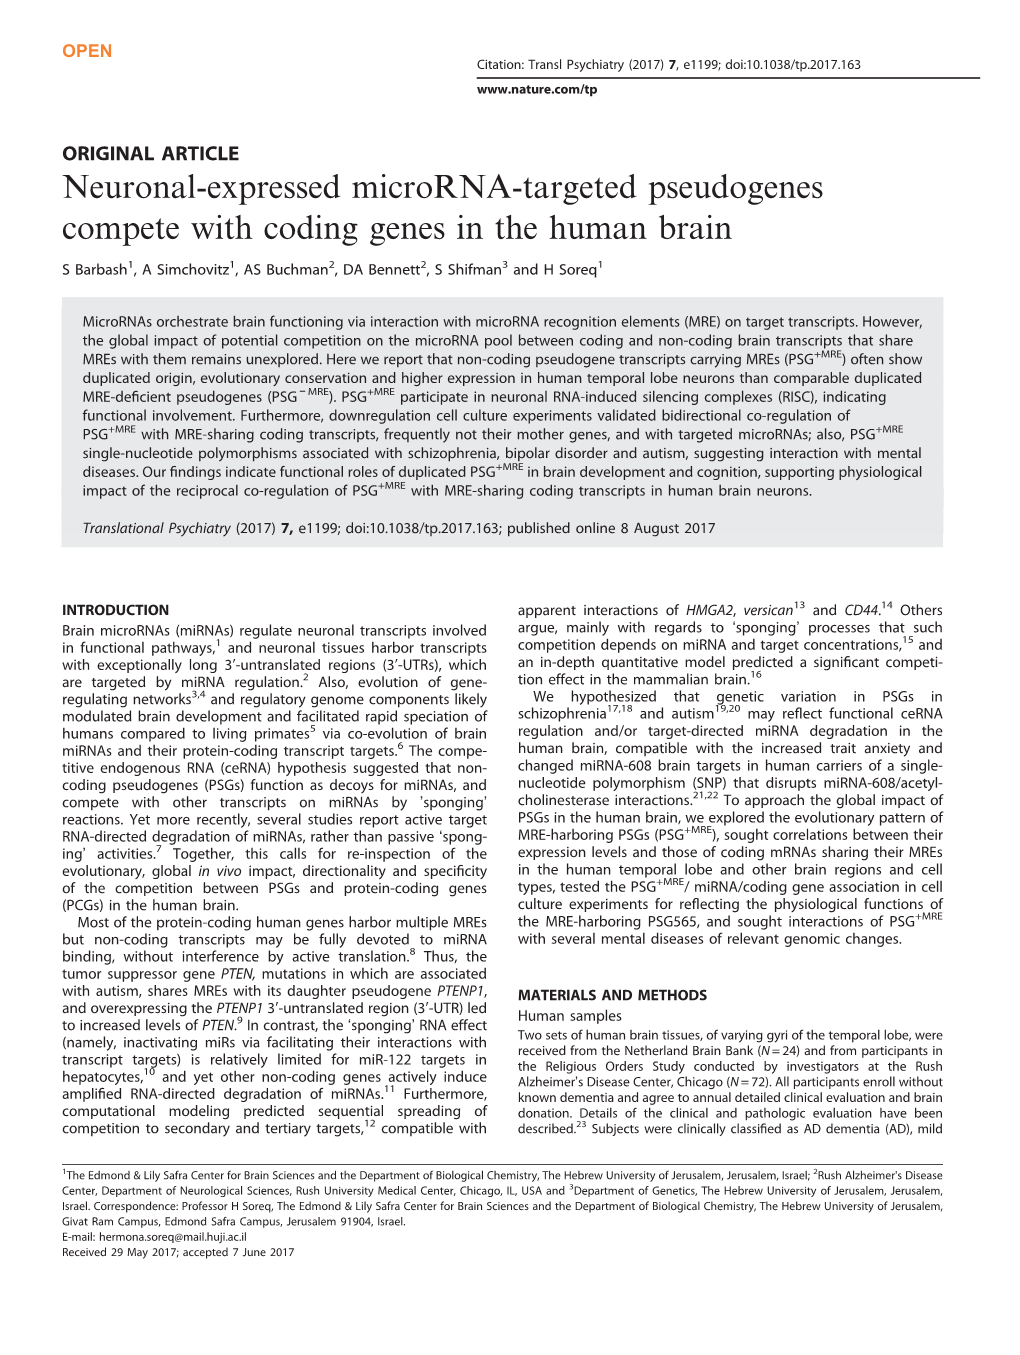 Neuronal-Expressed Microrna-Targeted Pseudogenes Compete with Coding Genes in the Human Brain